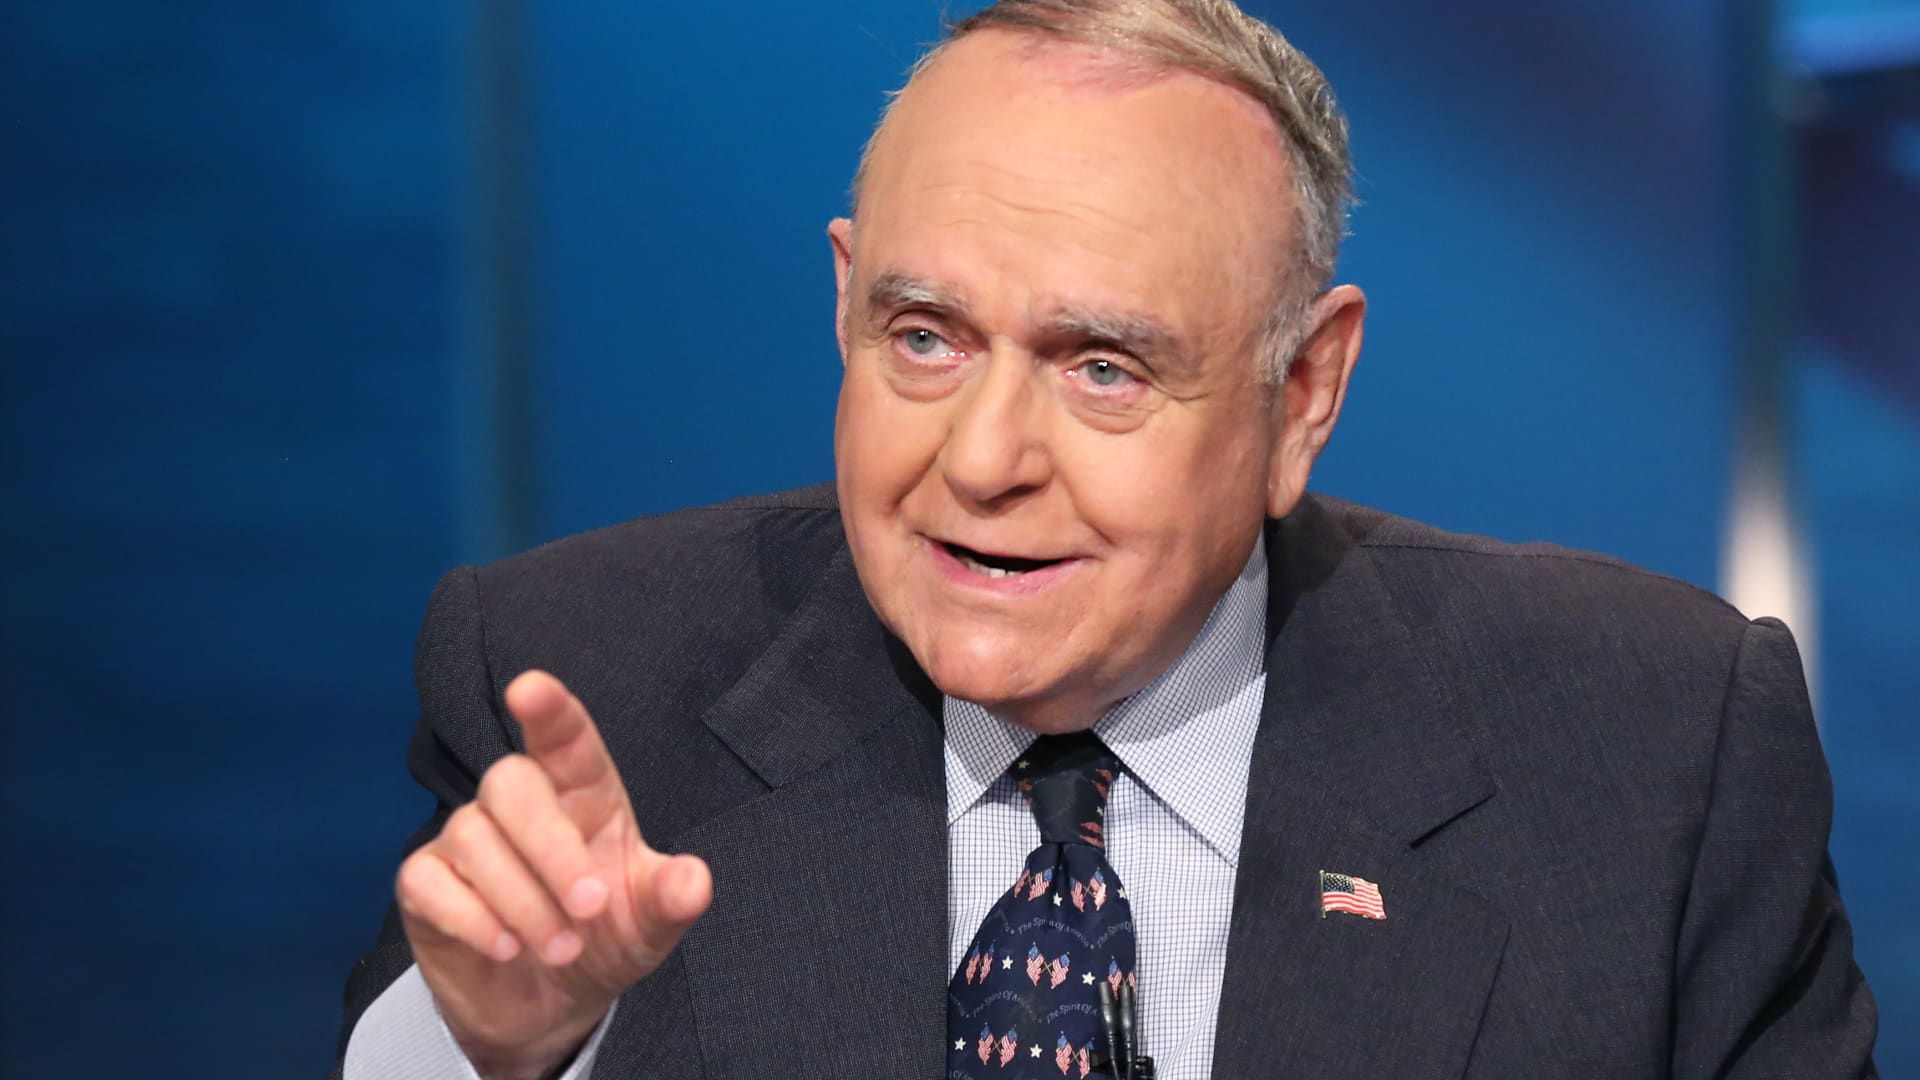 Leon Cooperman says new bull market isn’t coming anytime soon, but he’s finding cheap stocks to buy